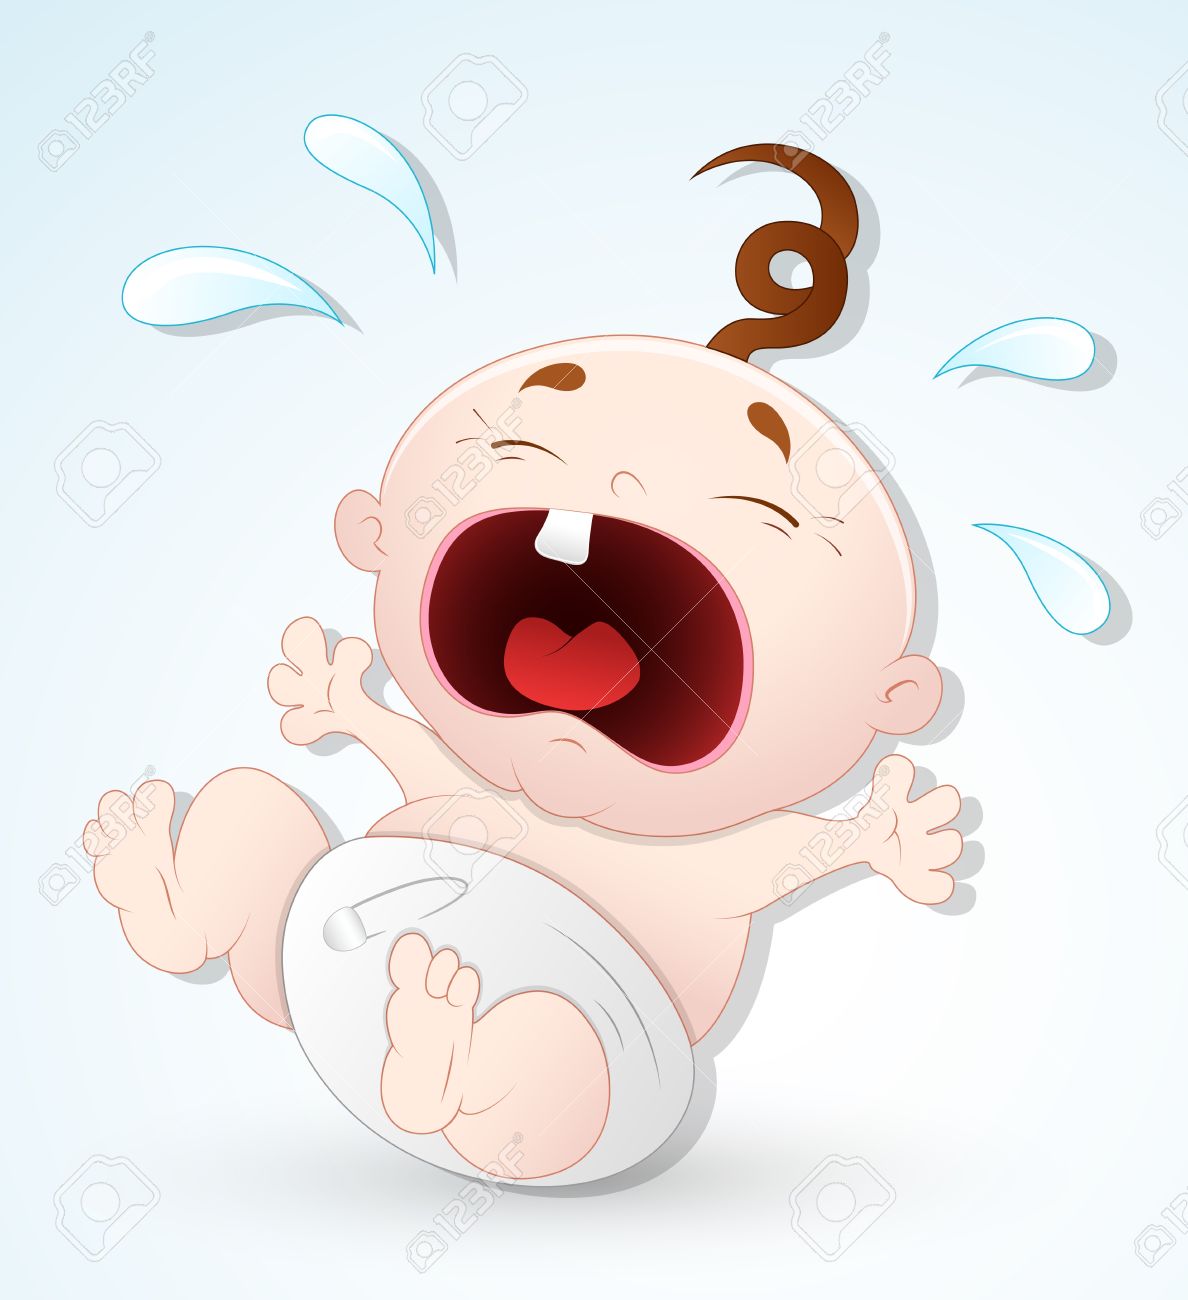 Baby crying clipart 9 » Clipart Station.